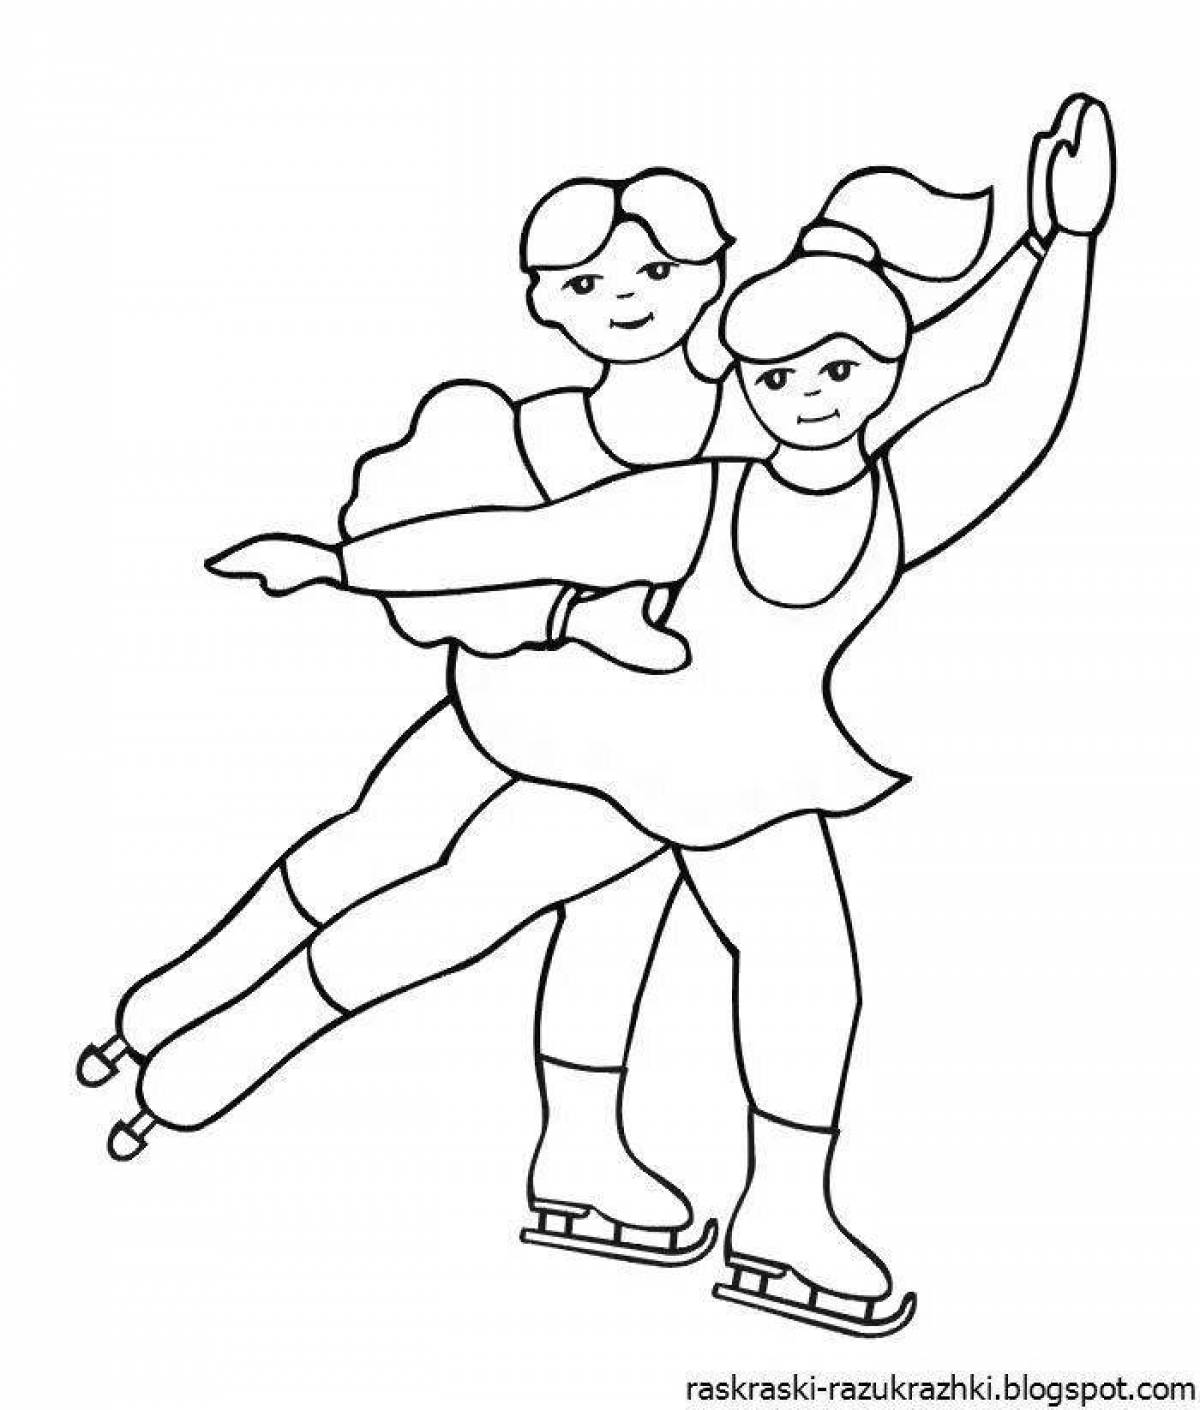 Playful winter sports coloring page